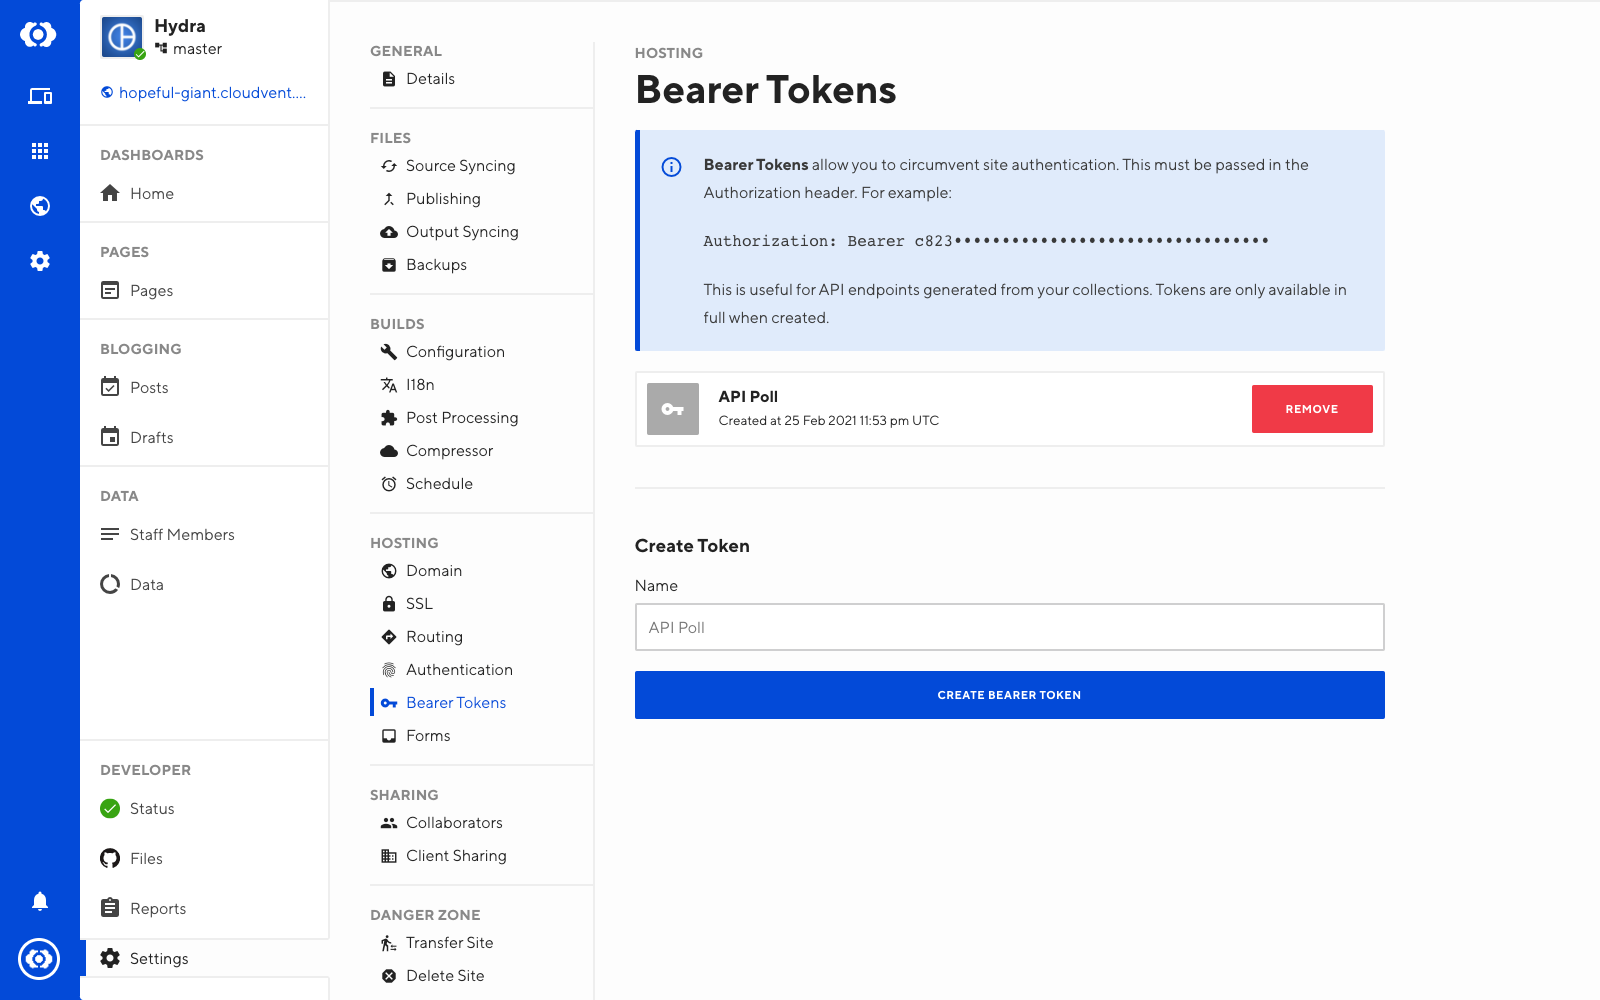 Using Bearer Tokens to authenticate with your site